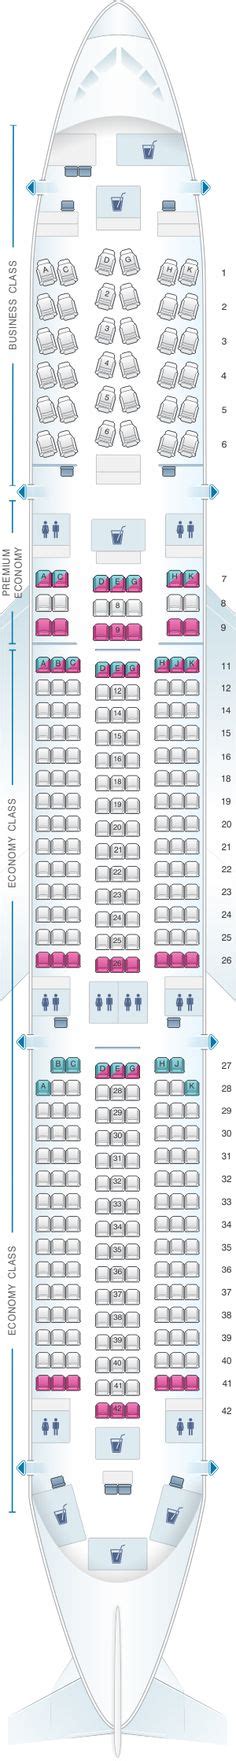 Seat Map Eurowings Airbus A319 Eurowings Kingfisher Airlines